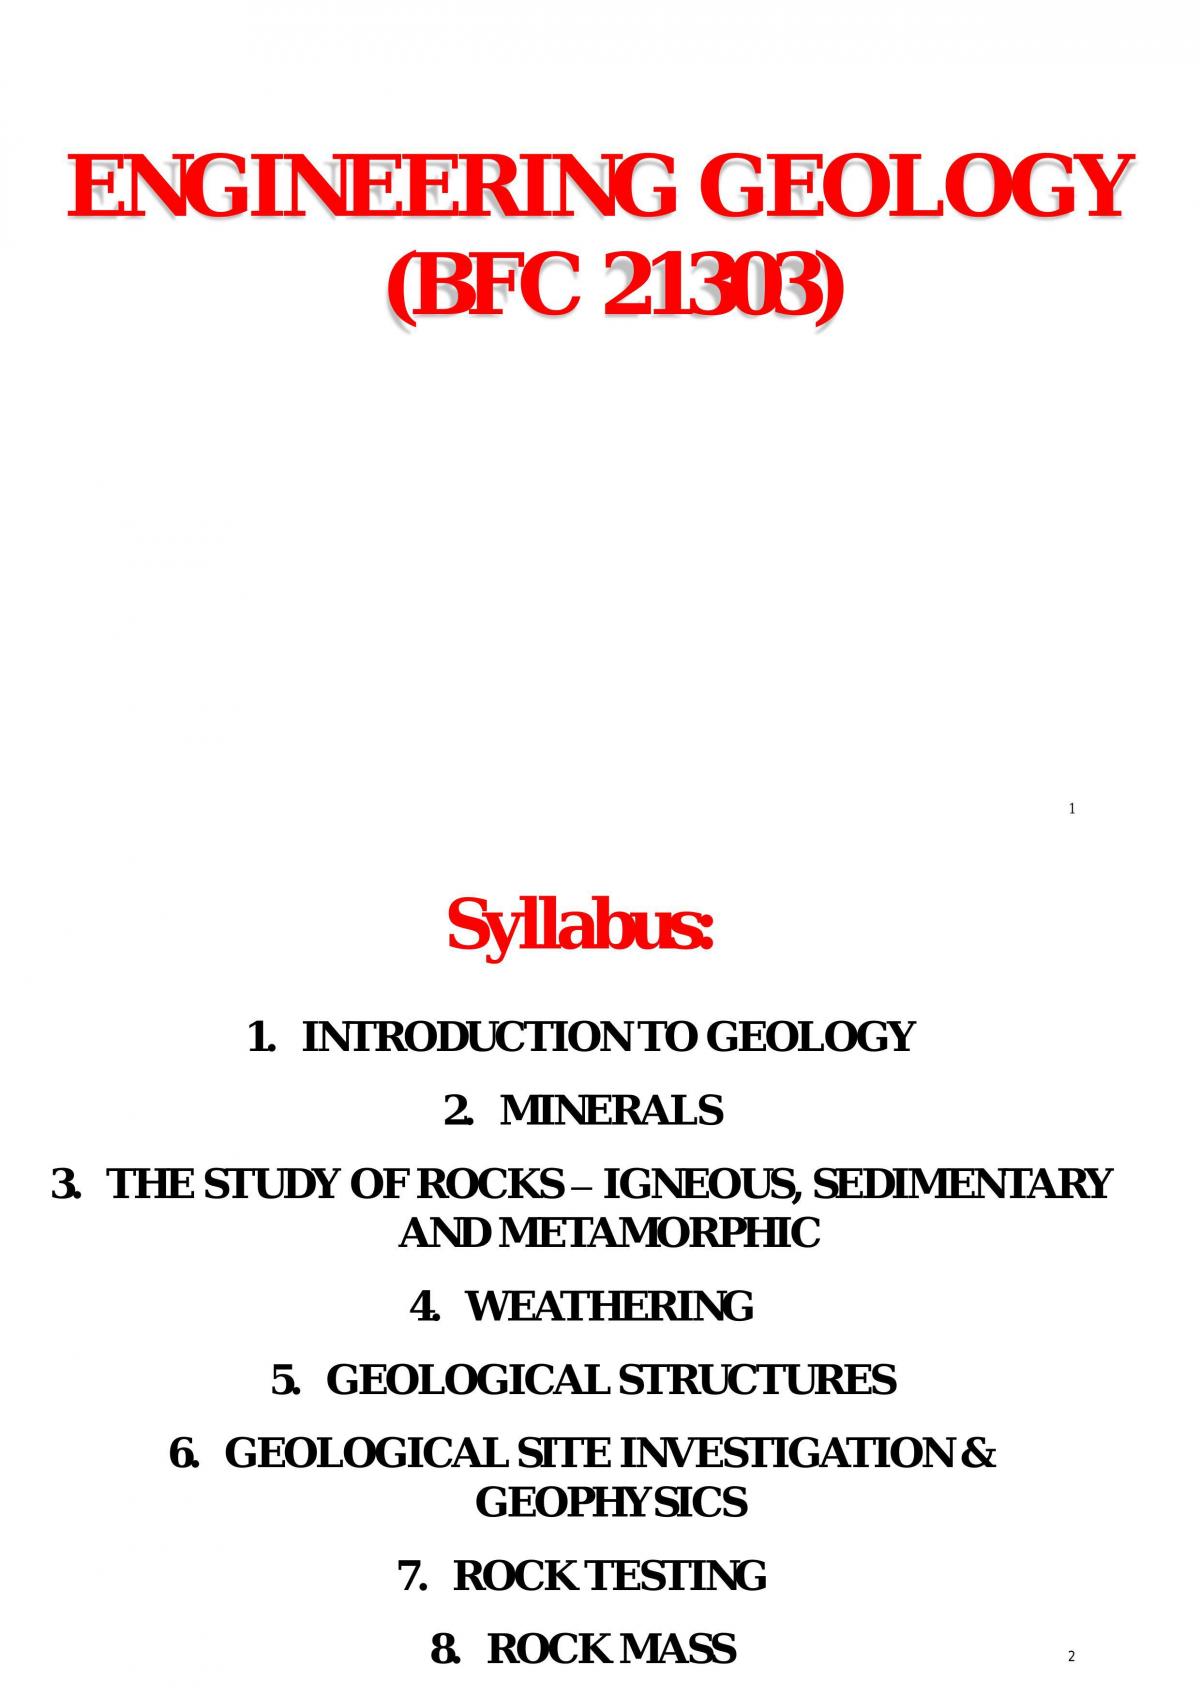 Bfc21303_engineering_geology_notes - Page 1